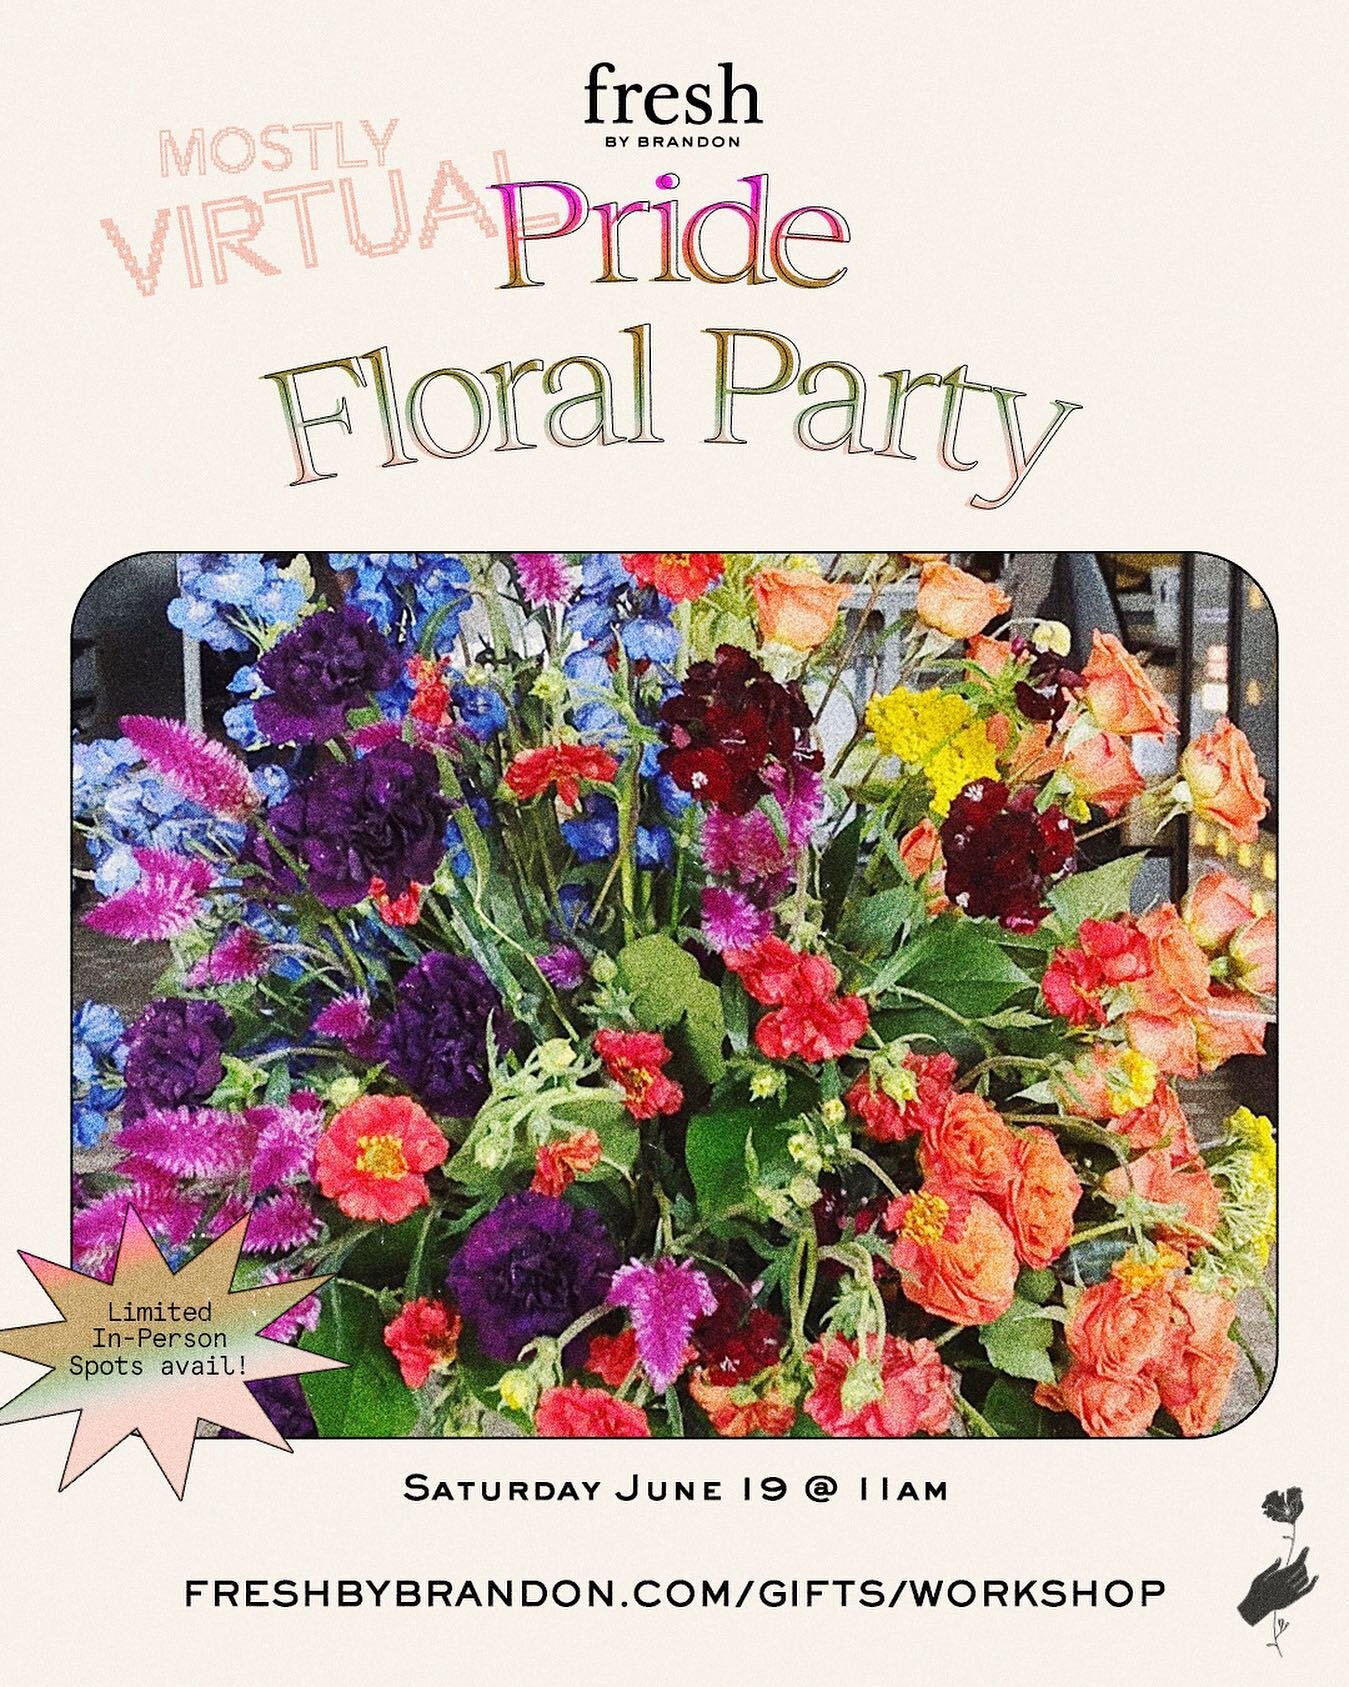 It&rsquo;s #pridemonth 🏳️&zwj;🌈💐 Join me for a fabulous morning of Pride and fresh flowers! Music! Drinks! And the spreading of the gay agenda! This workshop has everything!
.
Available with everything you need delivered to your door for those of 